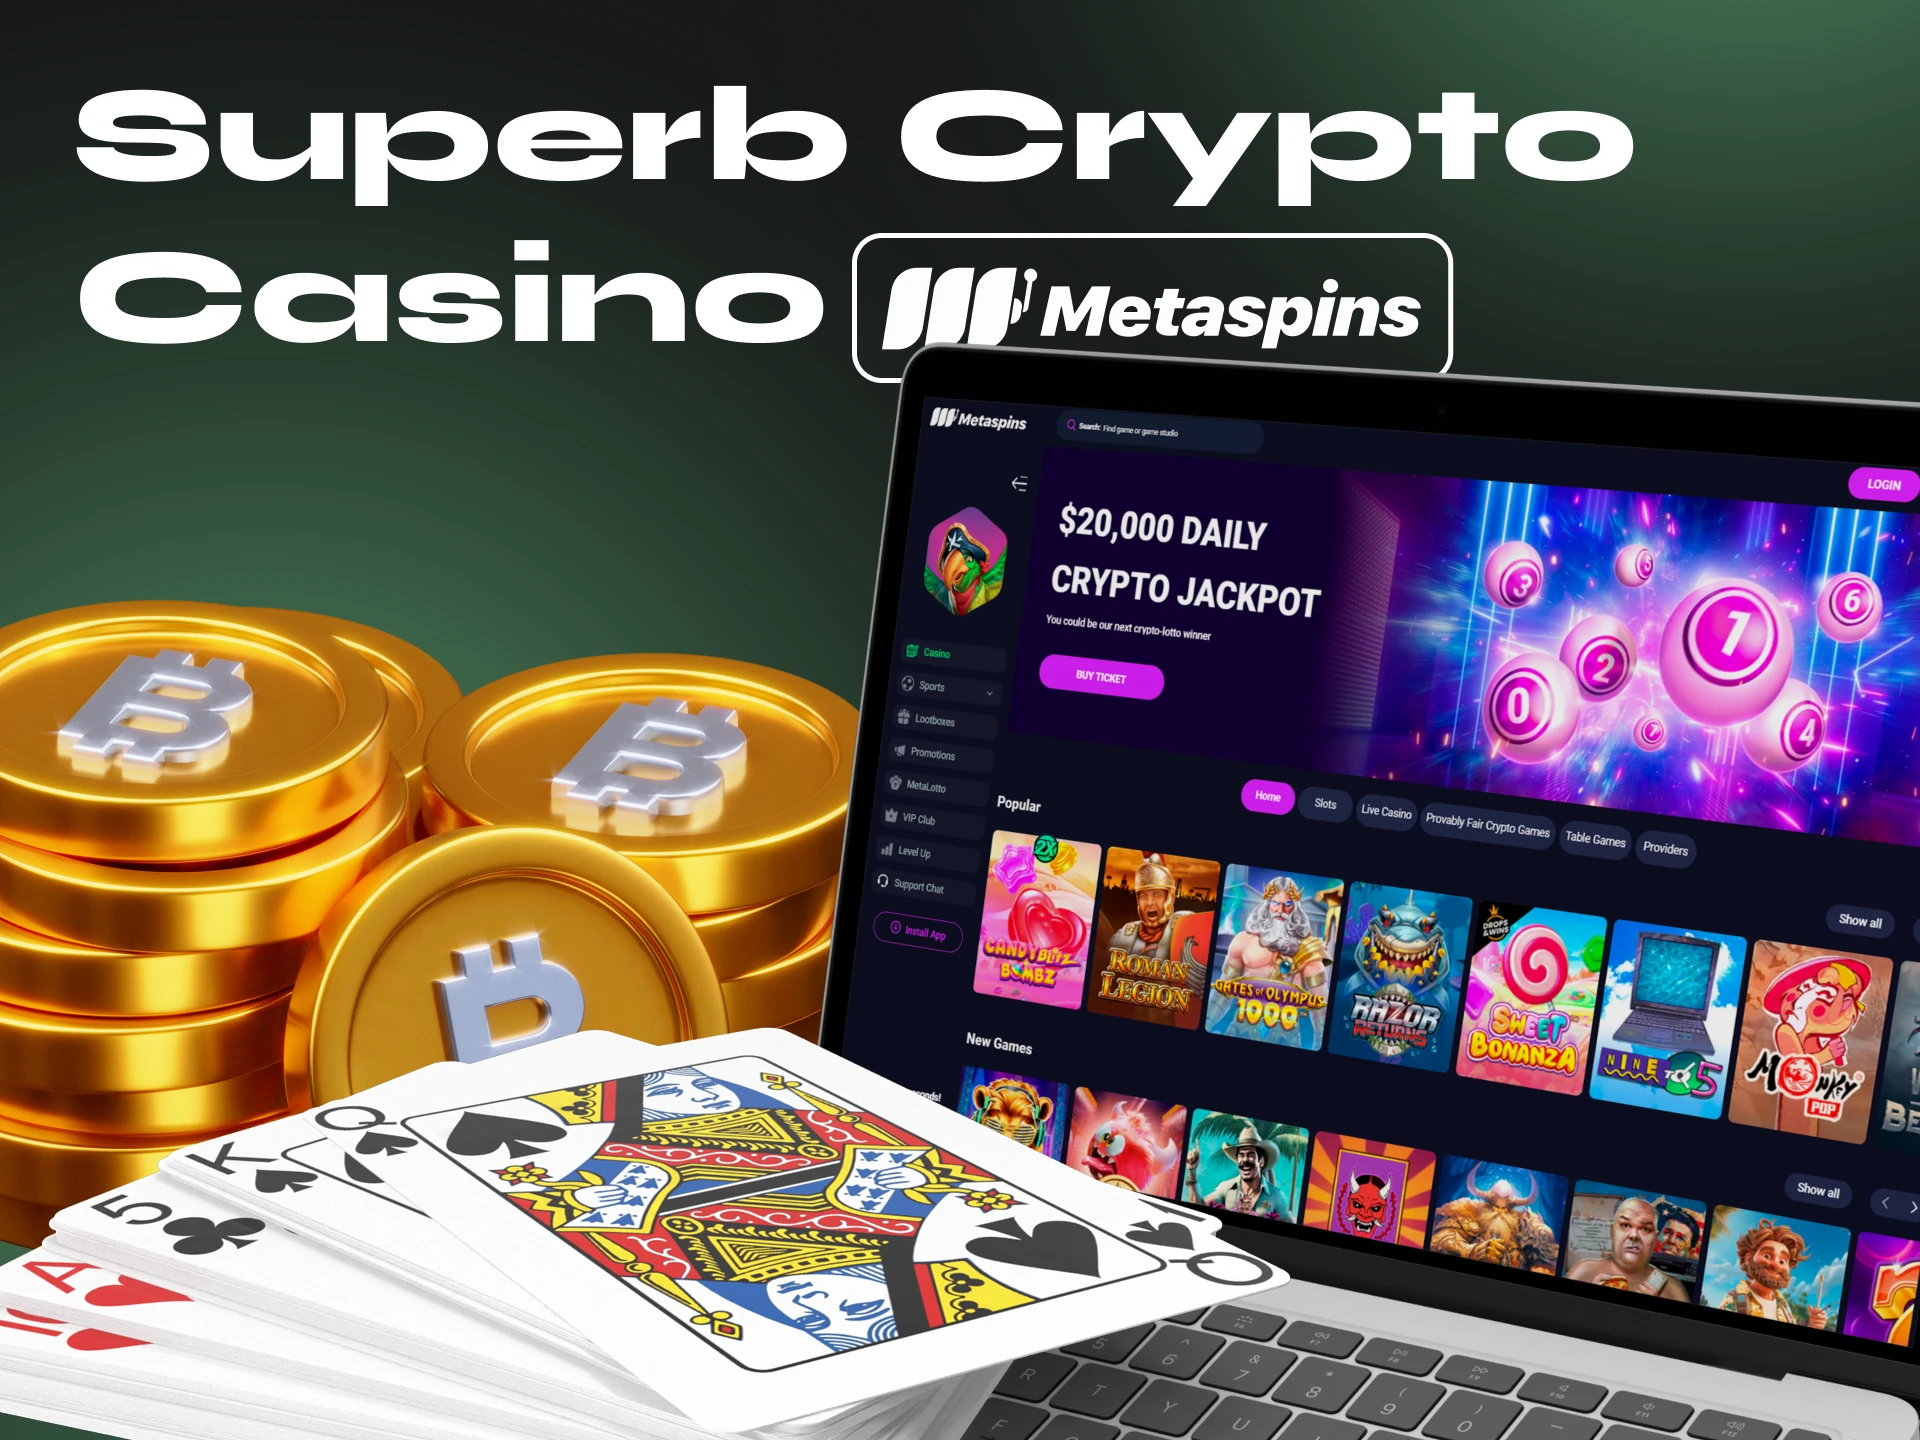 Try playing blackjack with cryptocurrency at Metaspins.